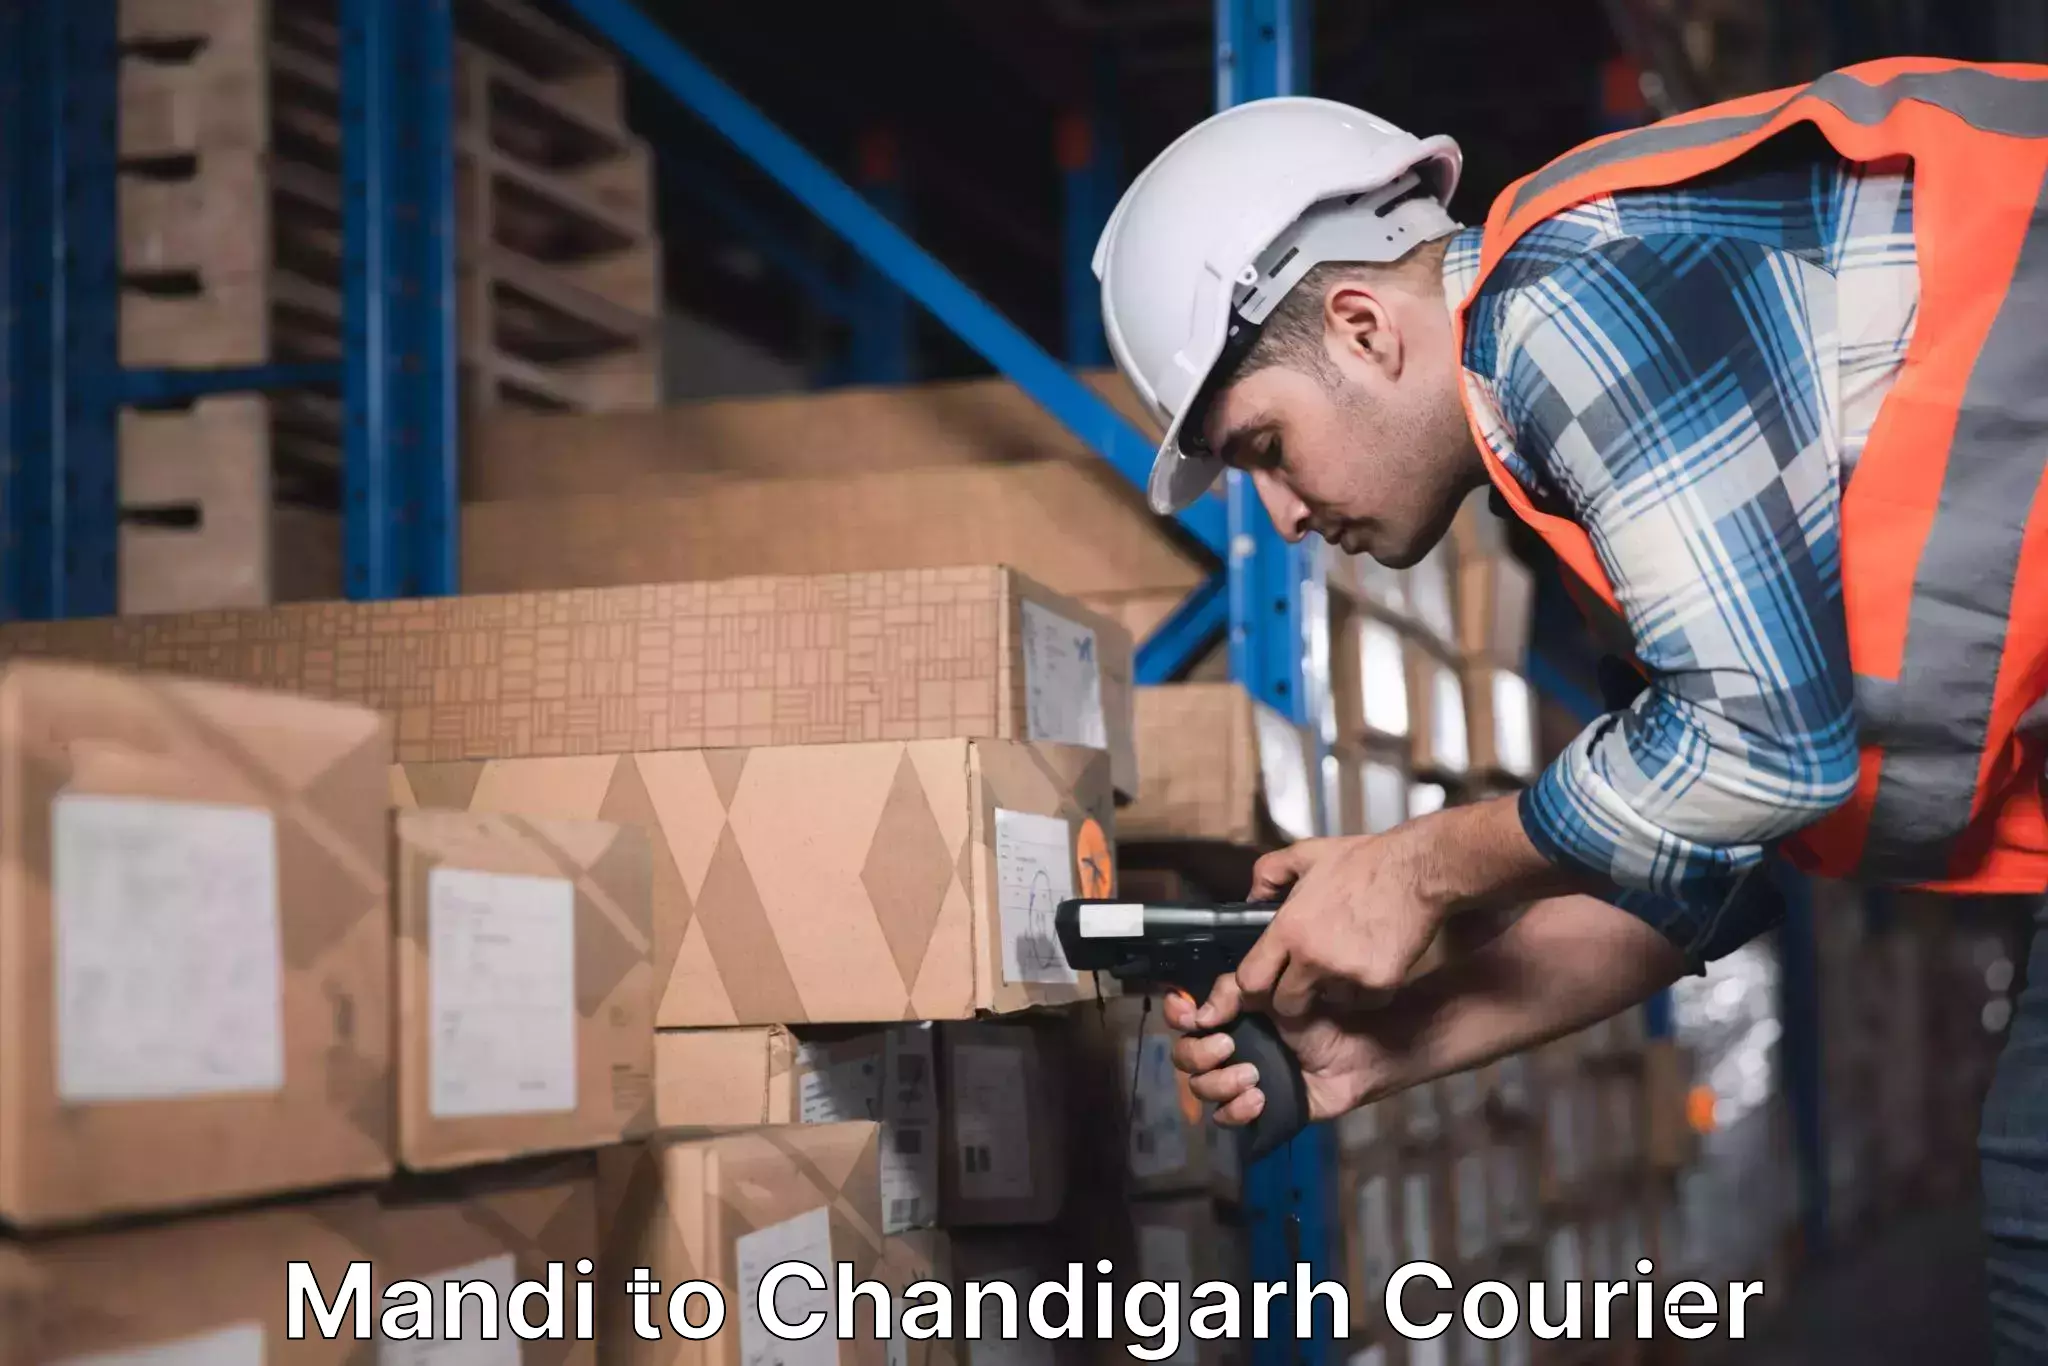 Next-day delivery options in Mandi to Chandigarh